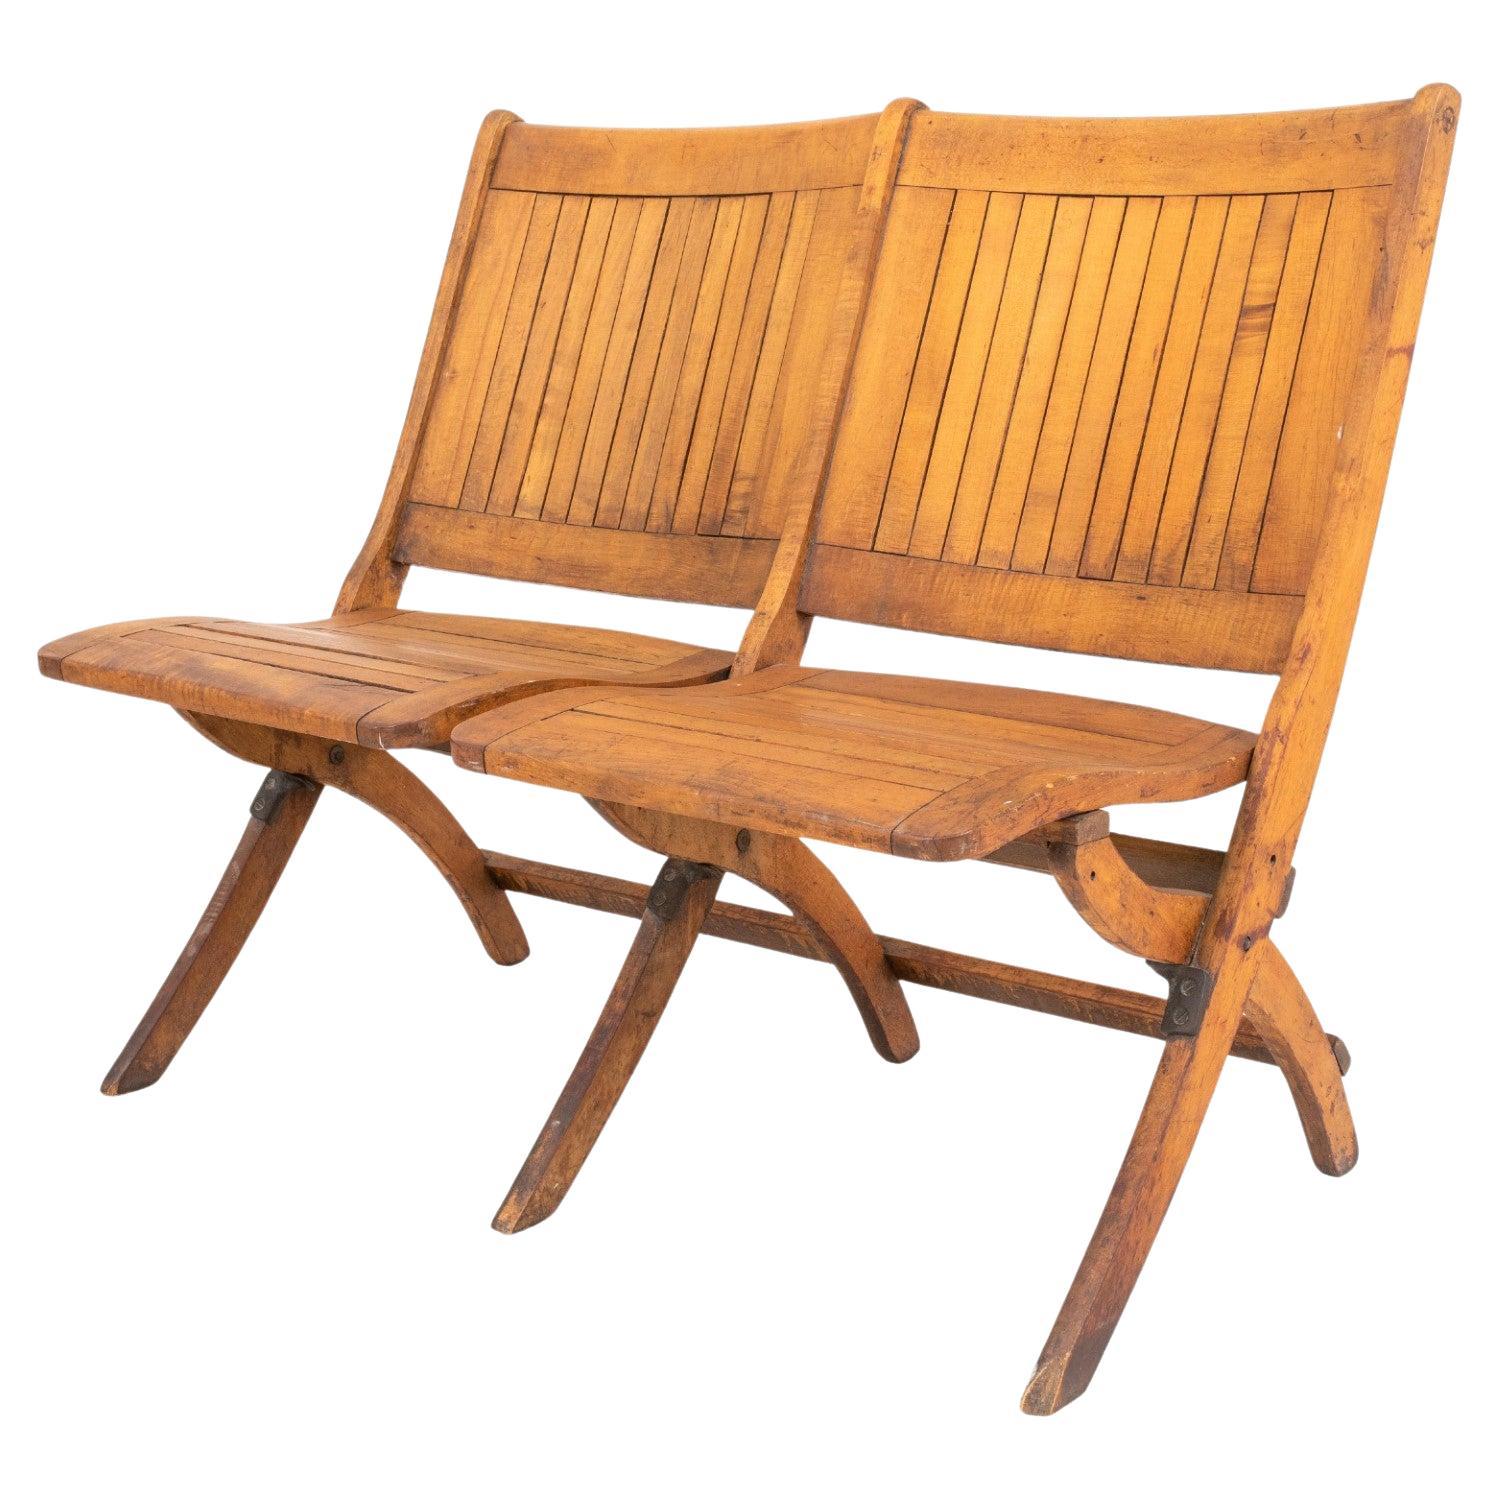 Wood Two Seat Folding Chairs Bench